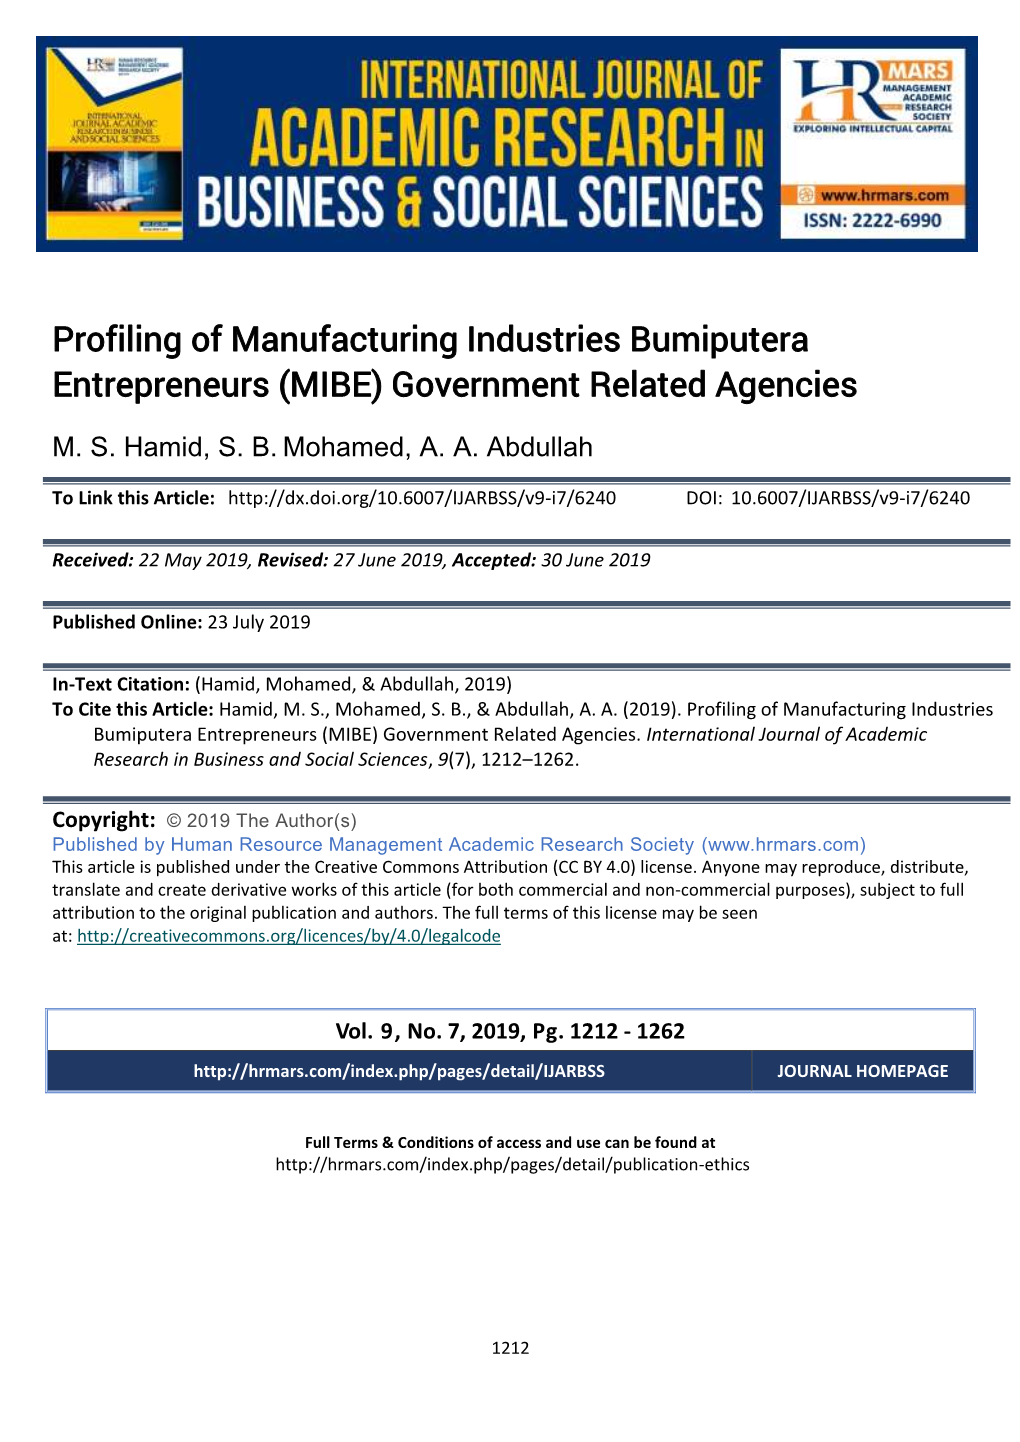 Profiling of Manufacturing Industries Bumiputera Entrepreneurs (MIBE) Government Related Agencies